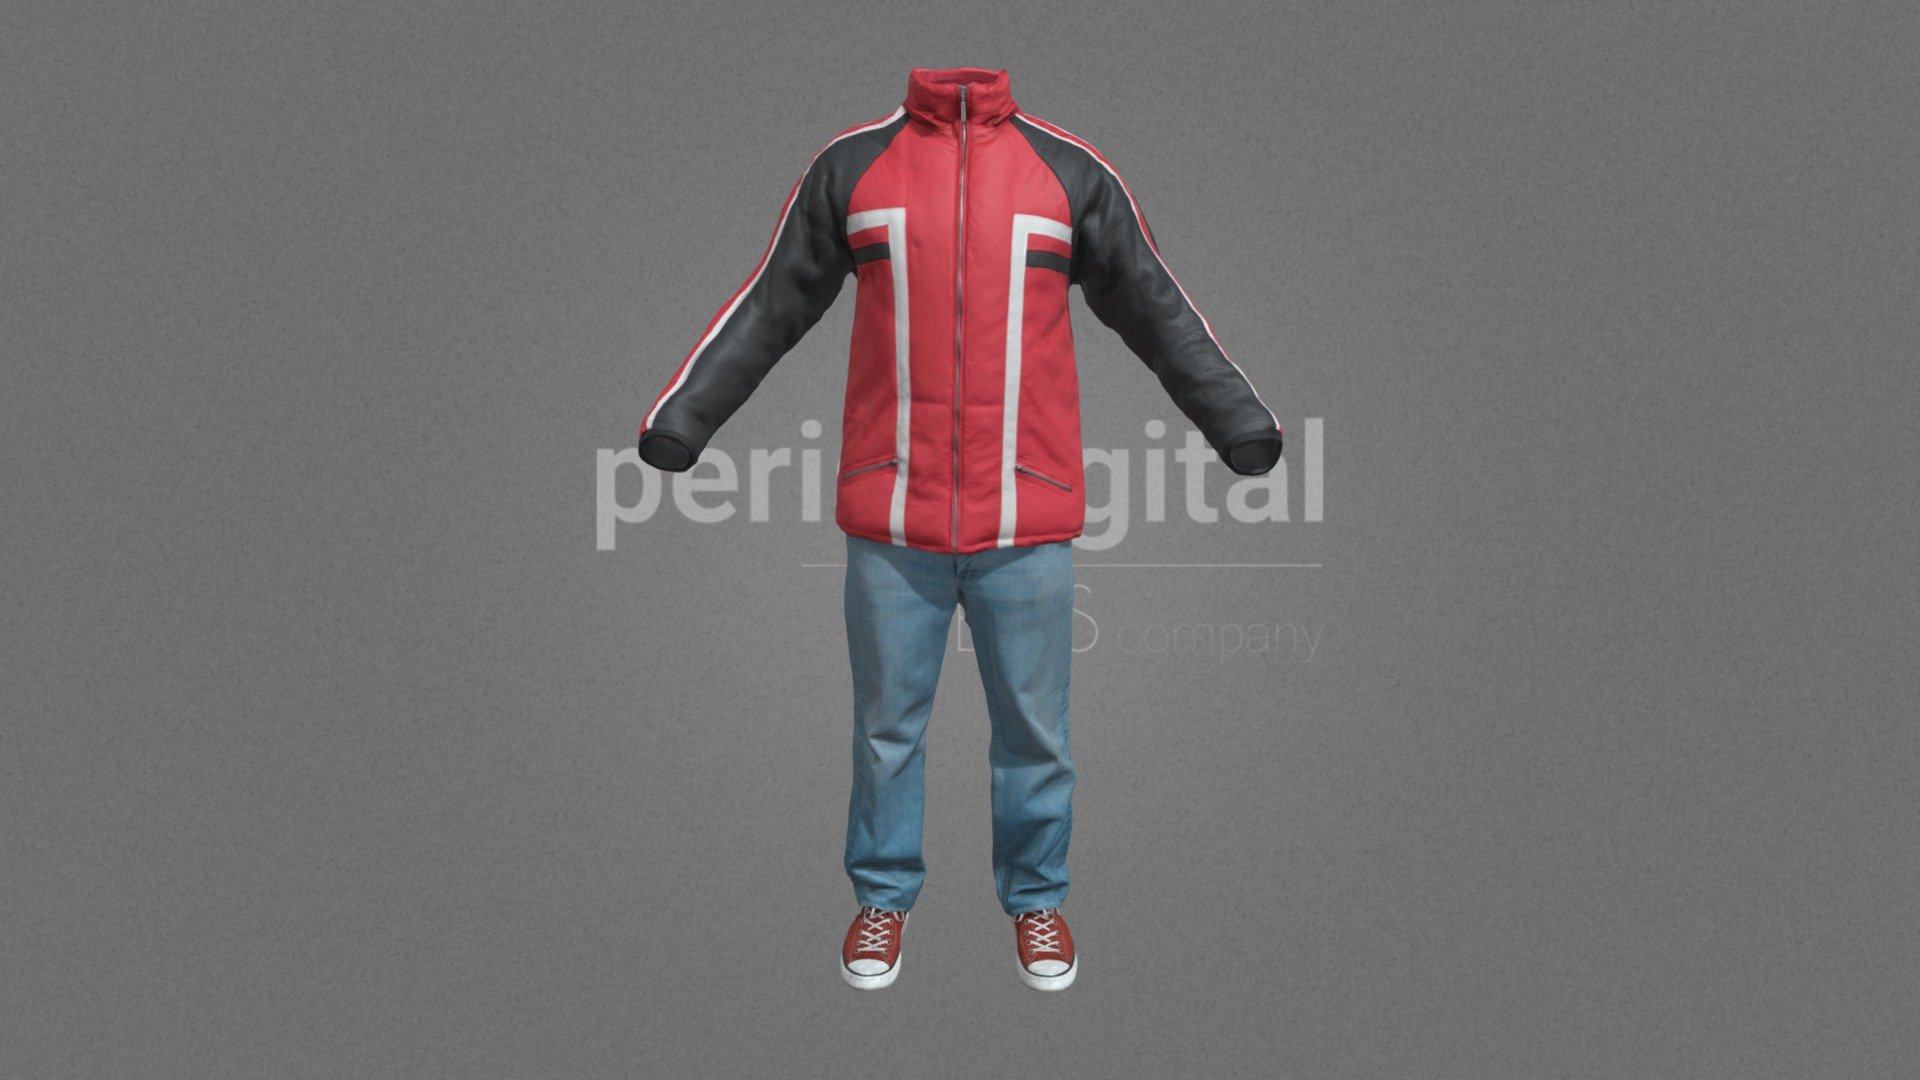 Red jacket with black and white stripes, blue jeans, red and white shoes

PERIS DIGITAL HIGH QUALITY 3D CLOTHING They are optimized for use in medium/high poly 3D scenes and optimized for rendering. We do not include characters, but they are positioned for you to include and adjust your own character. They have a LOW Poly Mesh (LODRIG) inside the Blender file (included in the AdditionalFiles), which you can use for vertex weighting or cloth simulation and thus, make the transfer of vertices or property masks from the LOW to the HIGH model. We have included in Additional Files, the texture maps in high resolution, as well as the Displacement maps in high resolution too, so you can perform extreme point of view with your 3D cameras. With the Blender file (included in AdditionalFiles) you will be able to edit any aspect of the set . Enjoy it!

Web: https://peris.digital/ - 80s Fashion Series - Man 48 - 3D model by Peris Digital (@perisdigital) 3d model